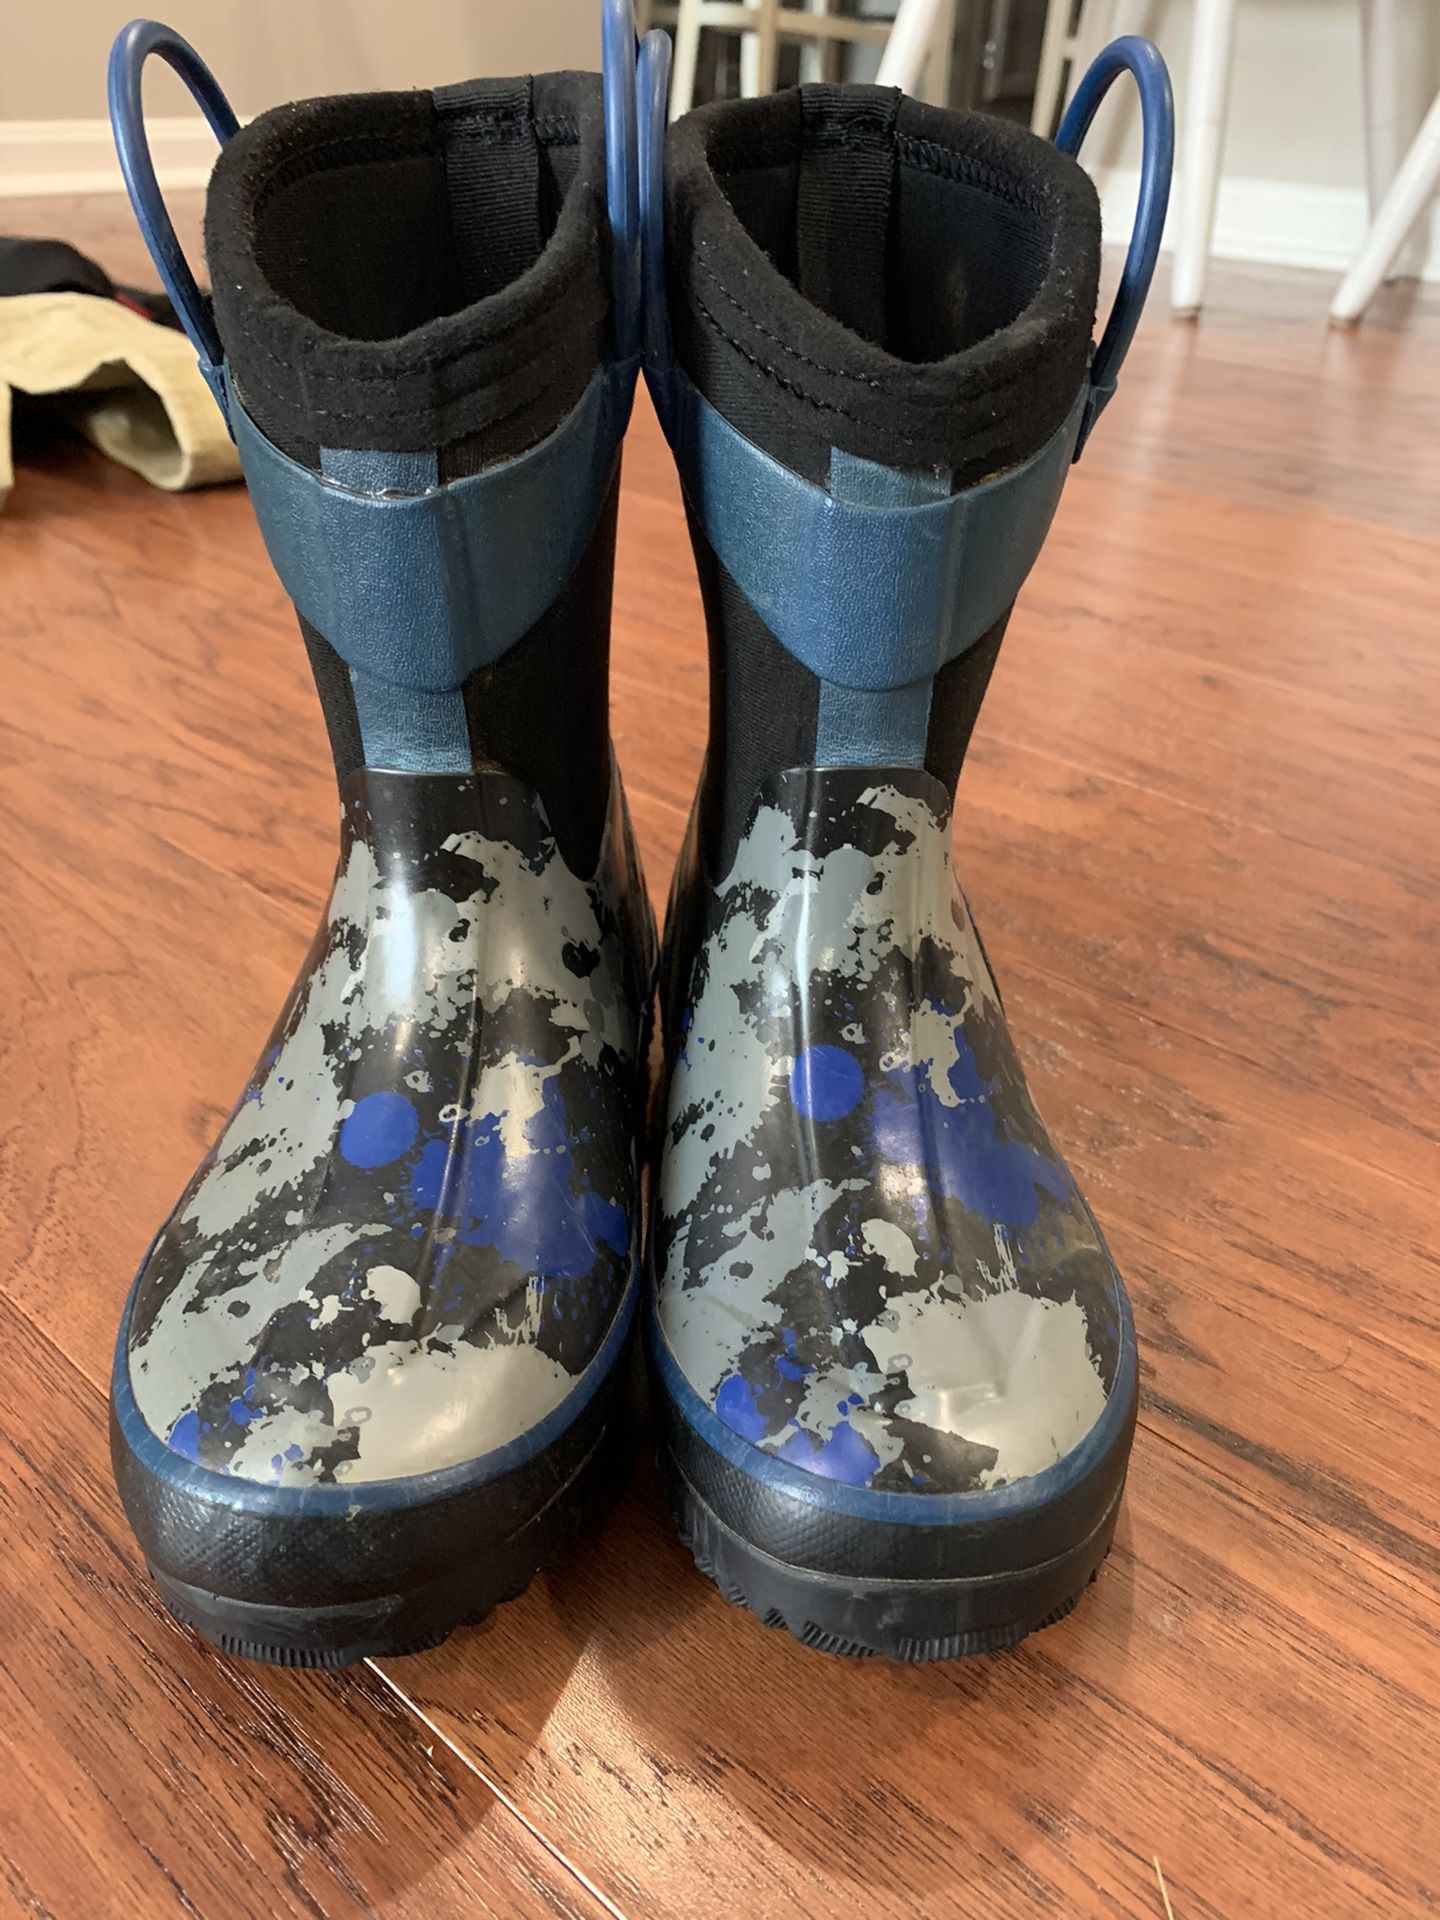 Western Chief insulated snow/rain boots size 11/12